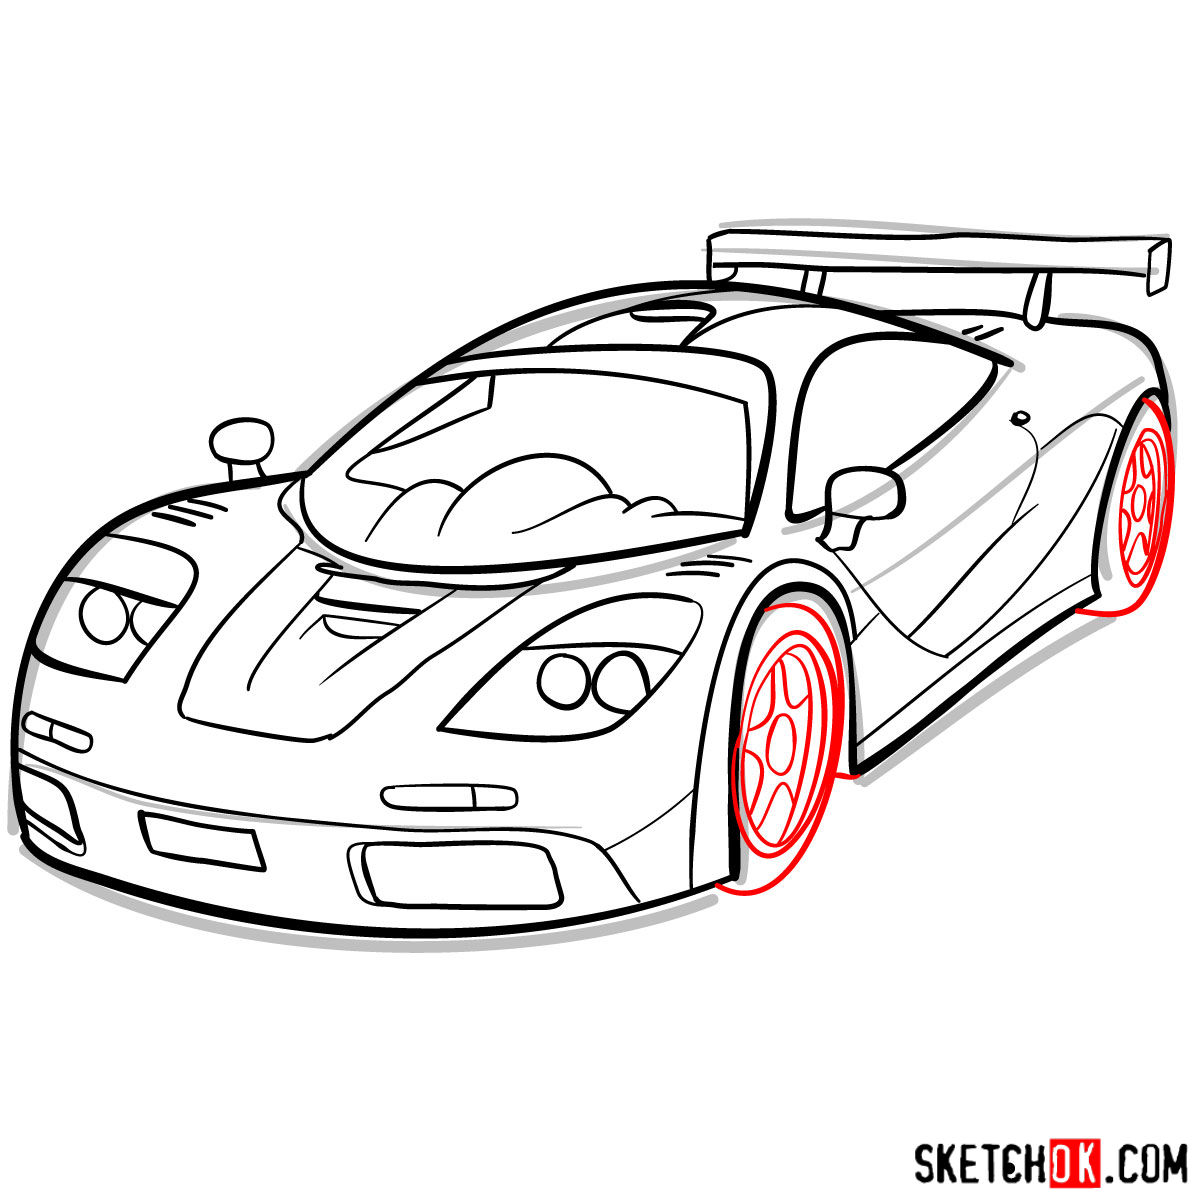 McLaren F1 - step by step drawing guide - step 11